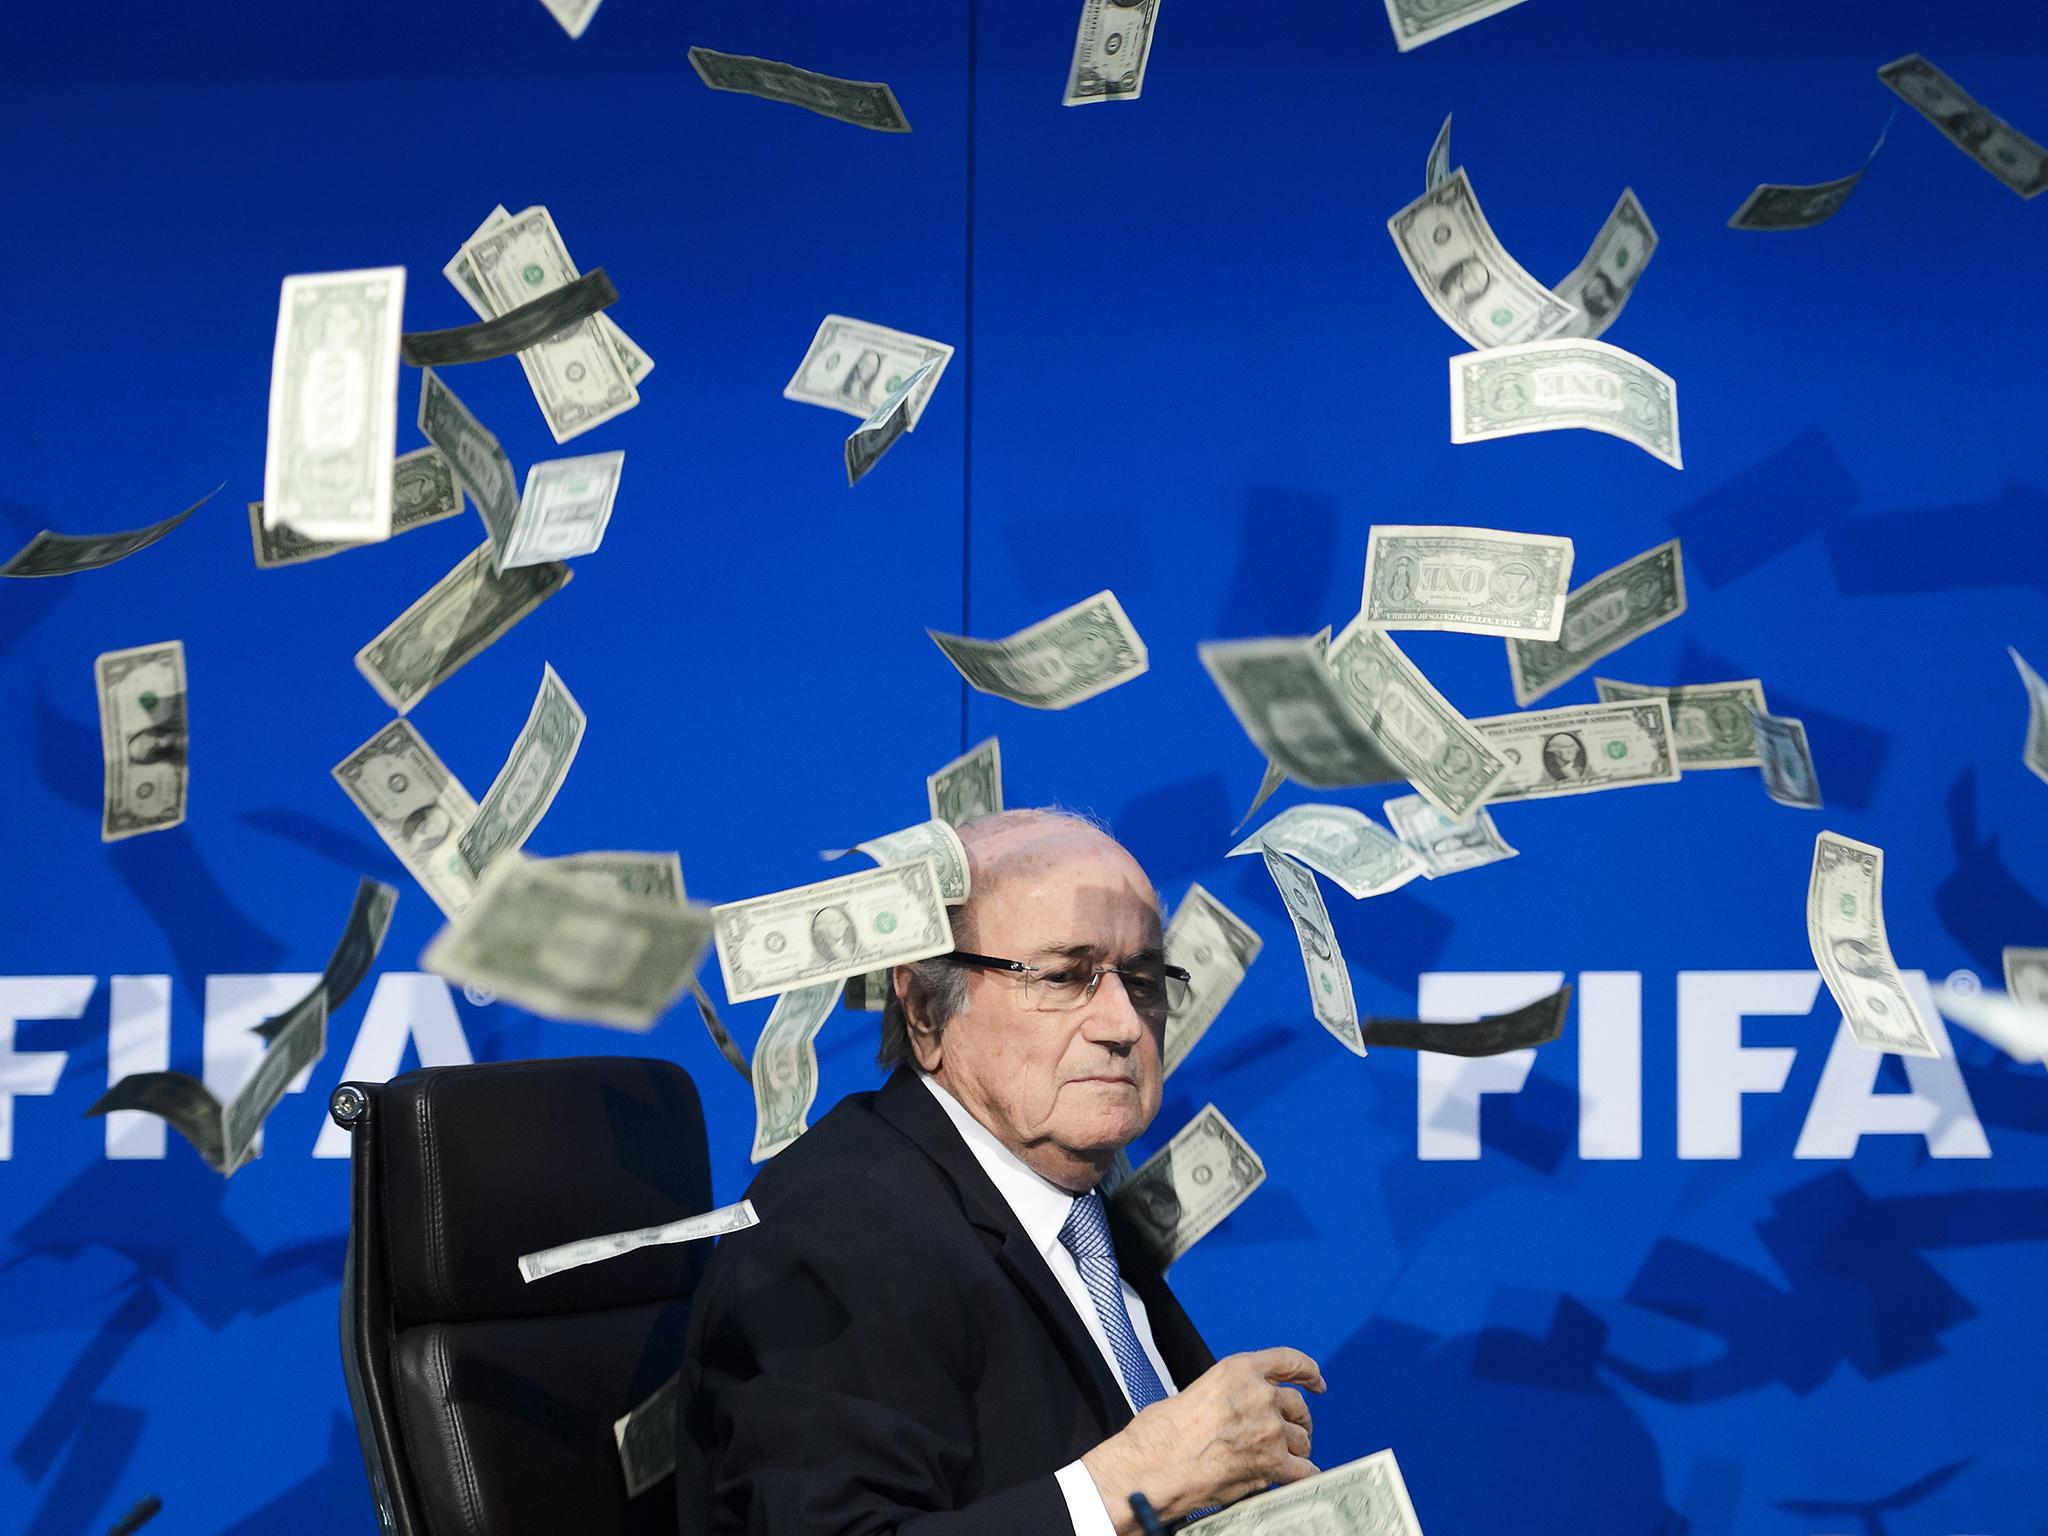 The then president of world football is showered with fake money in a satirical stunt by comedian Lee Nelson in Zurich last year